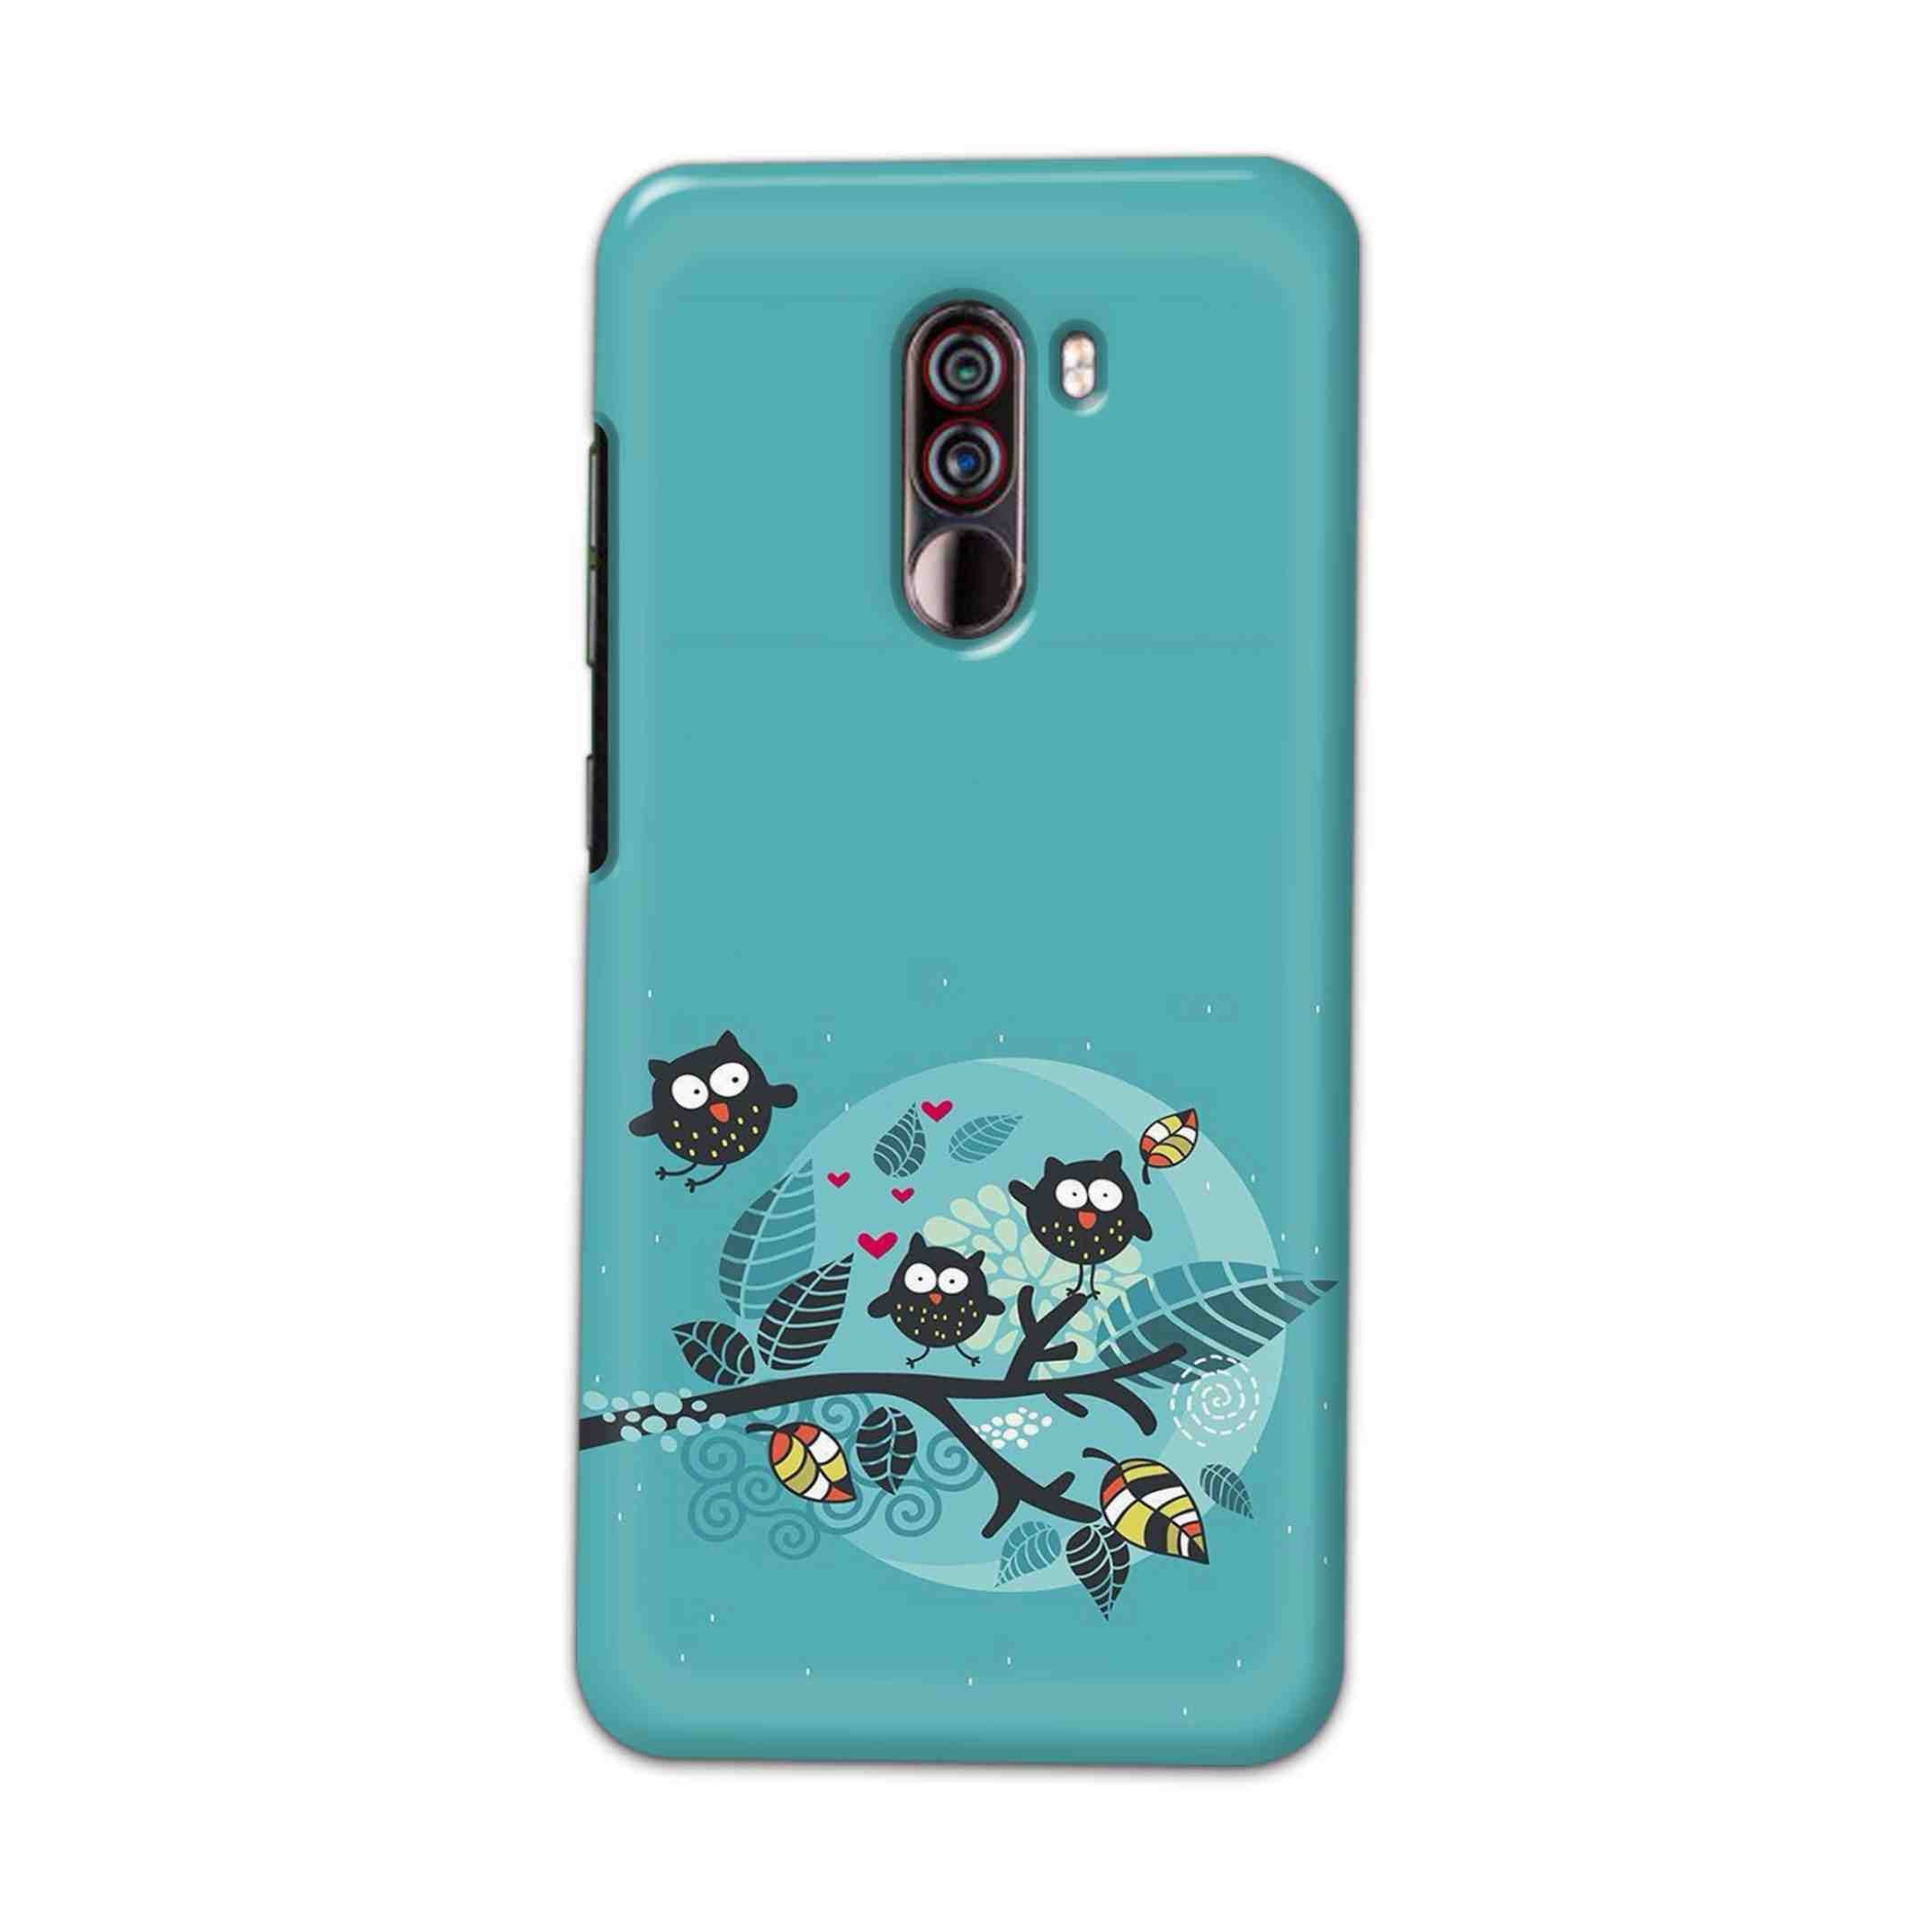 Buy Owl Hard Back Mobile Phone Case Cover For Xiaomi Pocophone F1 Online